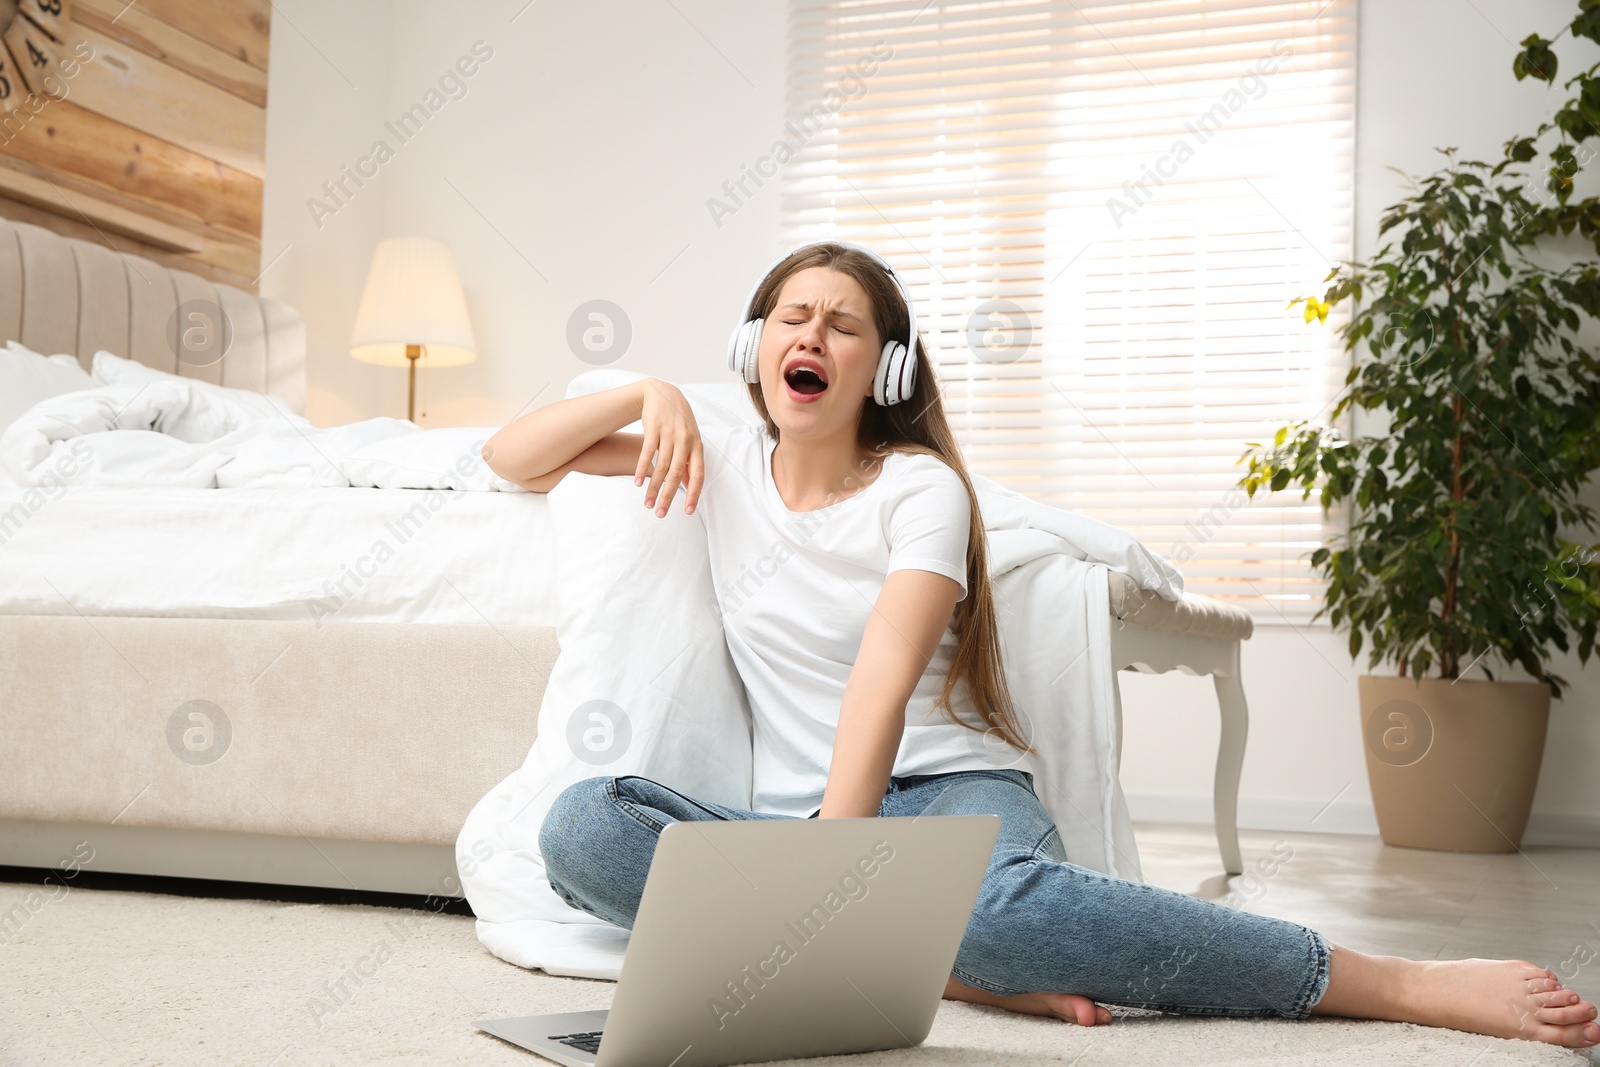 Photo of Lazy young woman with laptop and headphones in bedroom